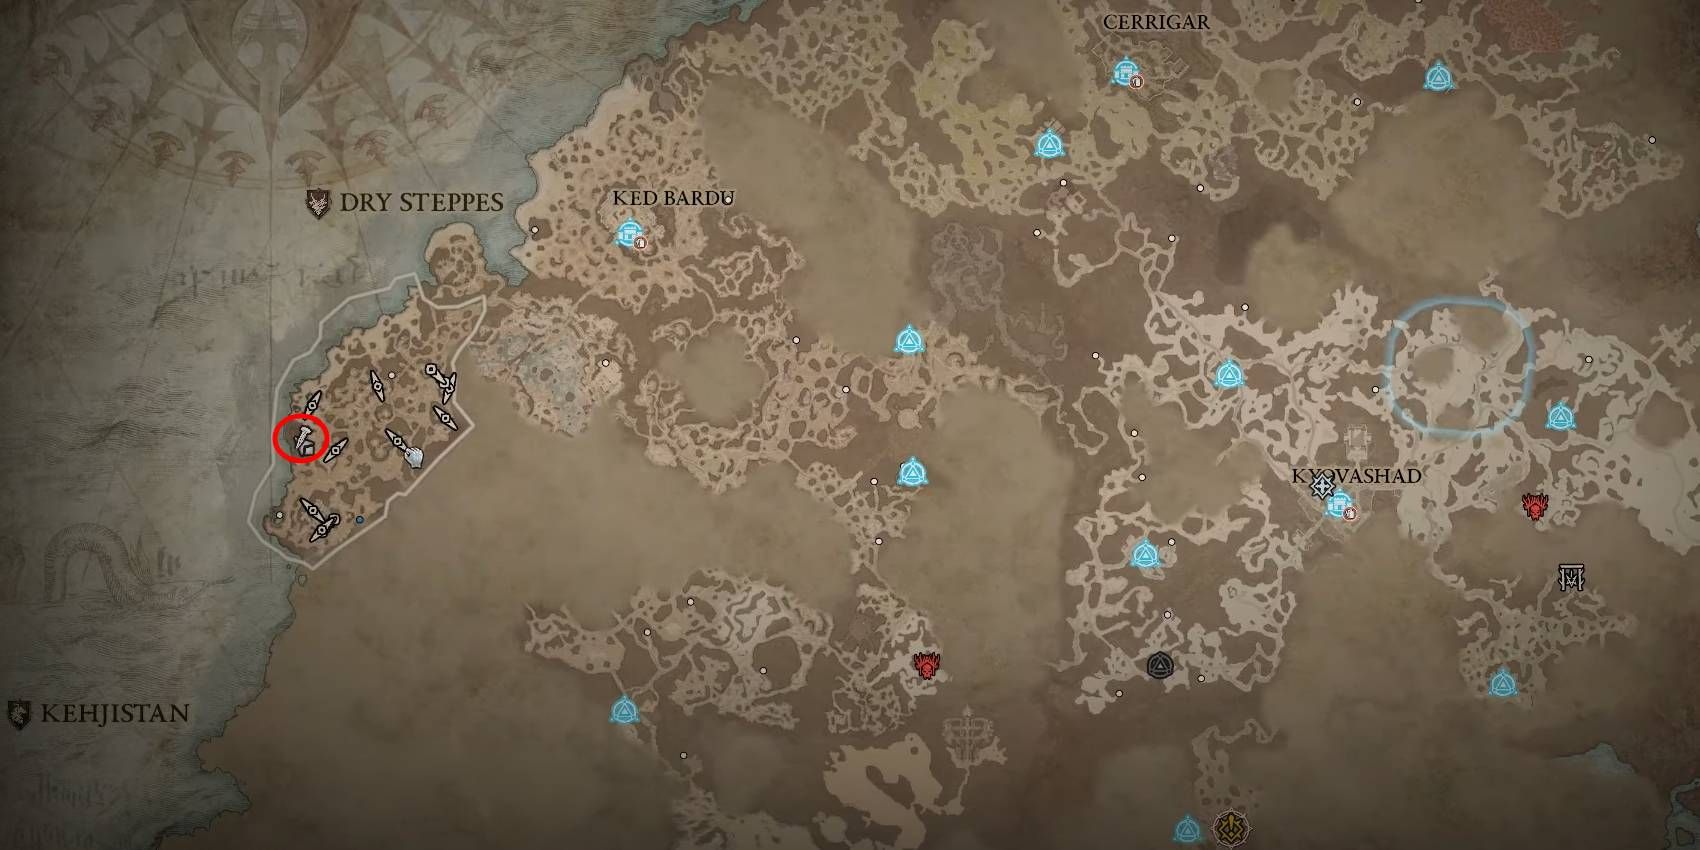 Diablo 4 Almunn Rare Elite Spawn Location Marked in Red Circle on Map